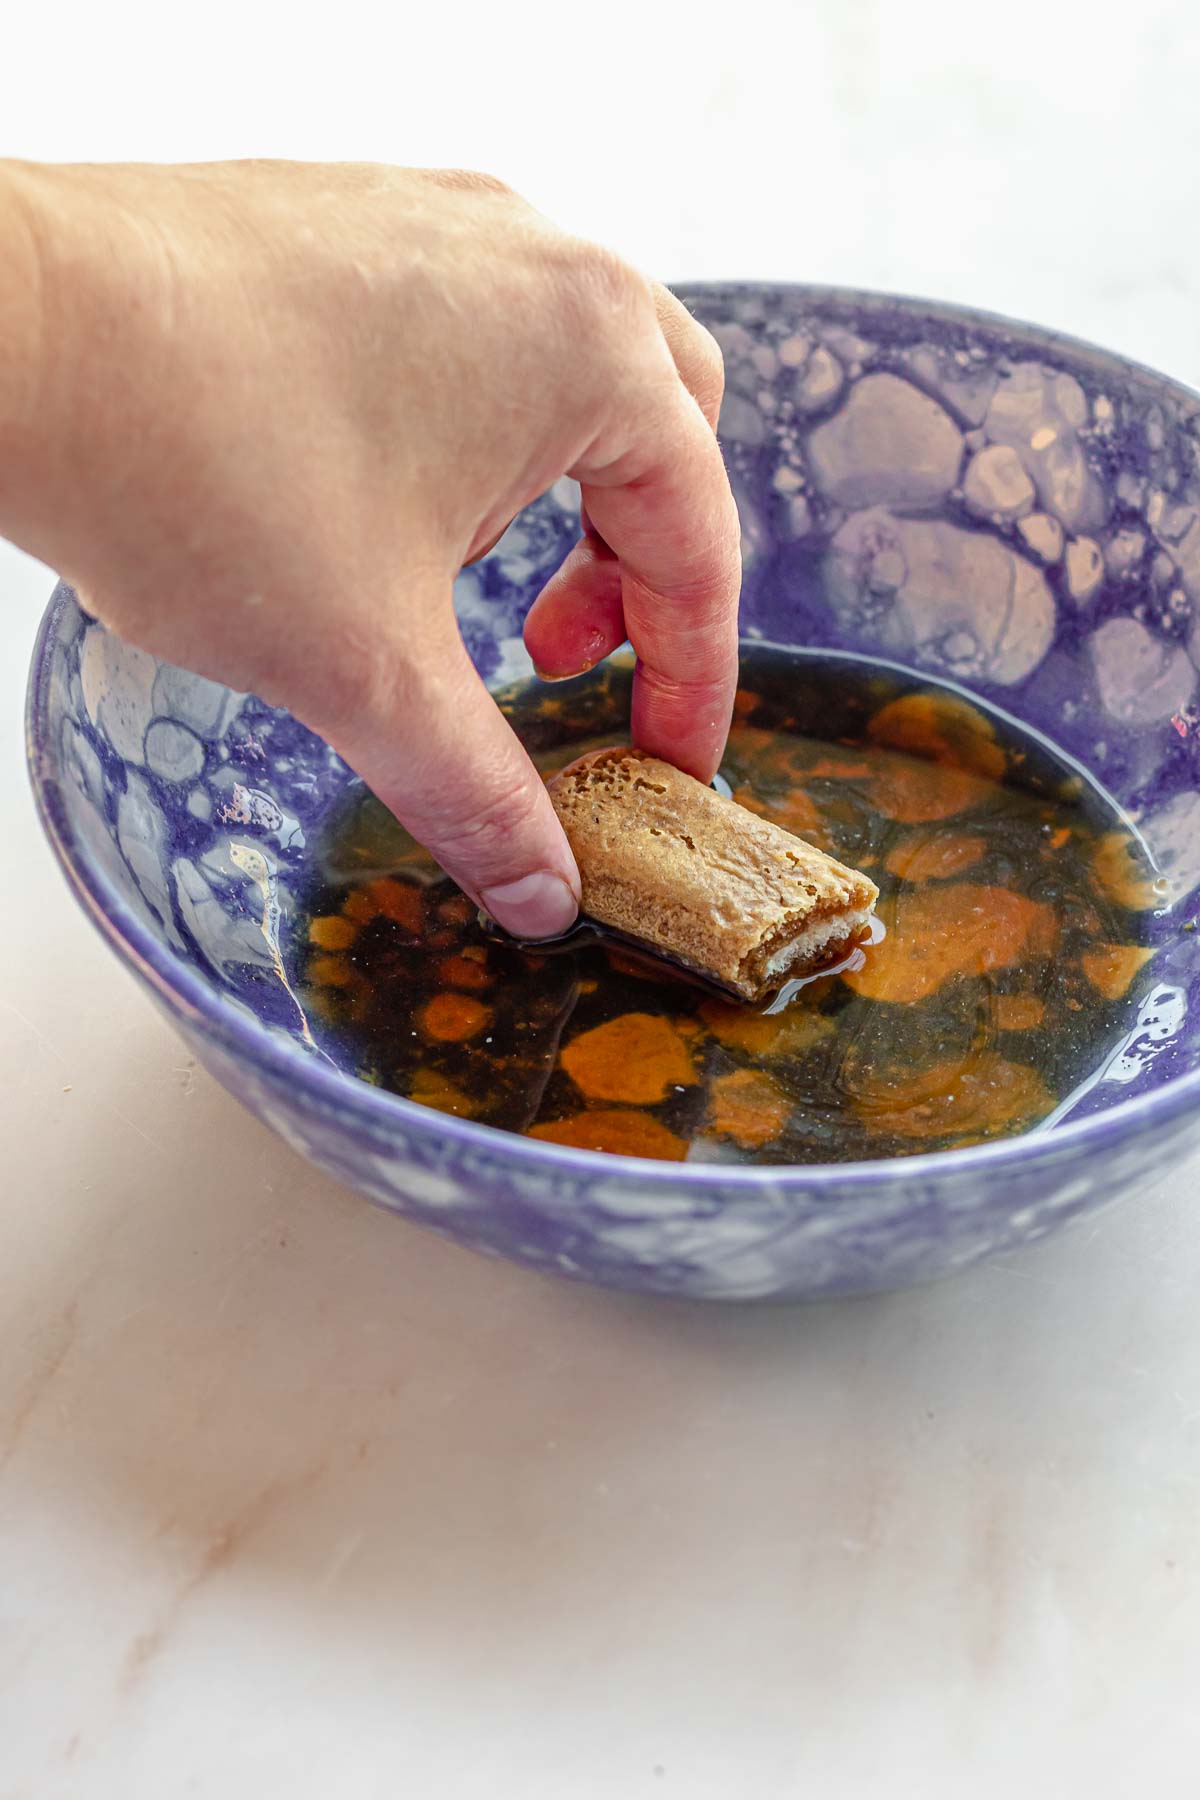 A hand soaks a piece of ladyfingers in coffee in a bowl.